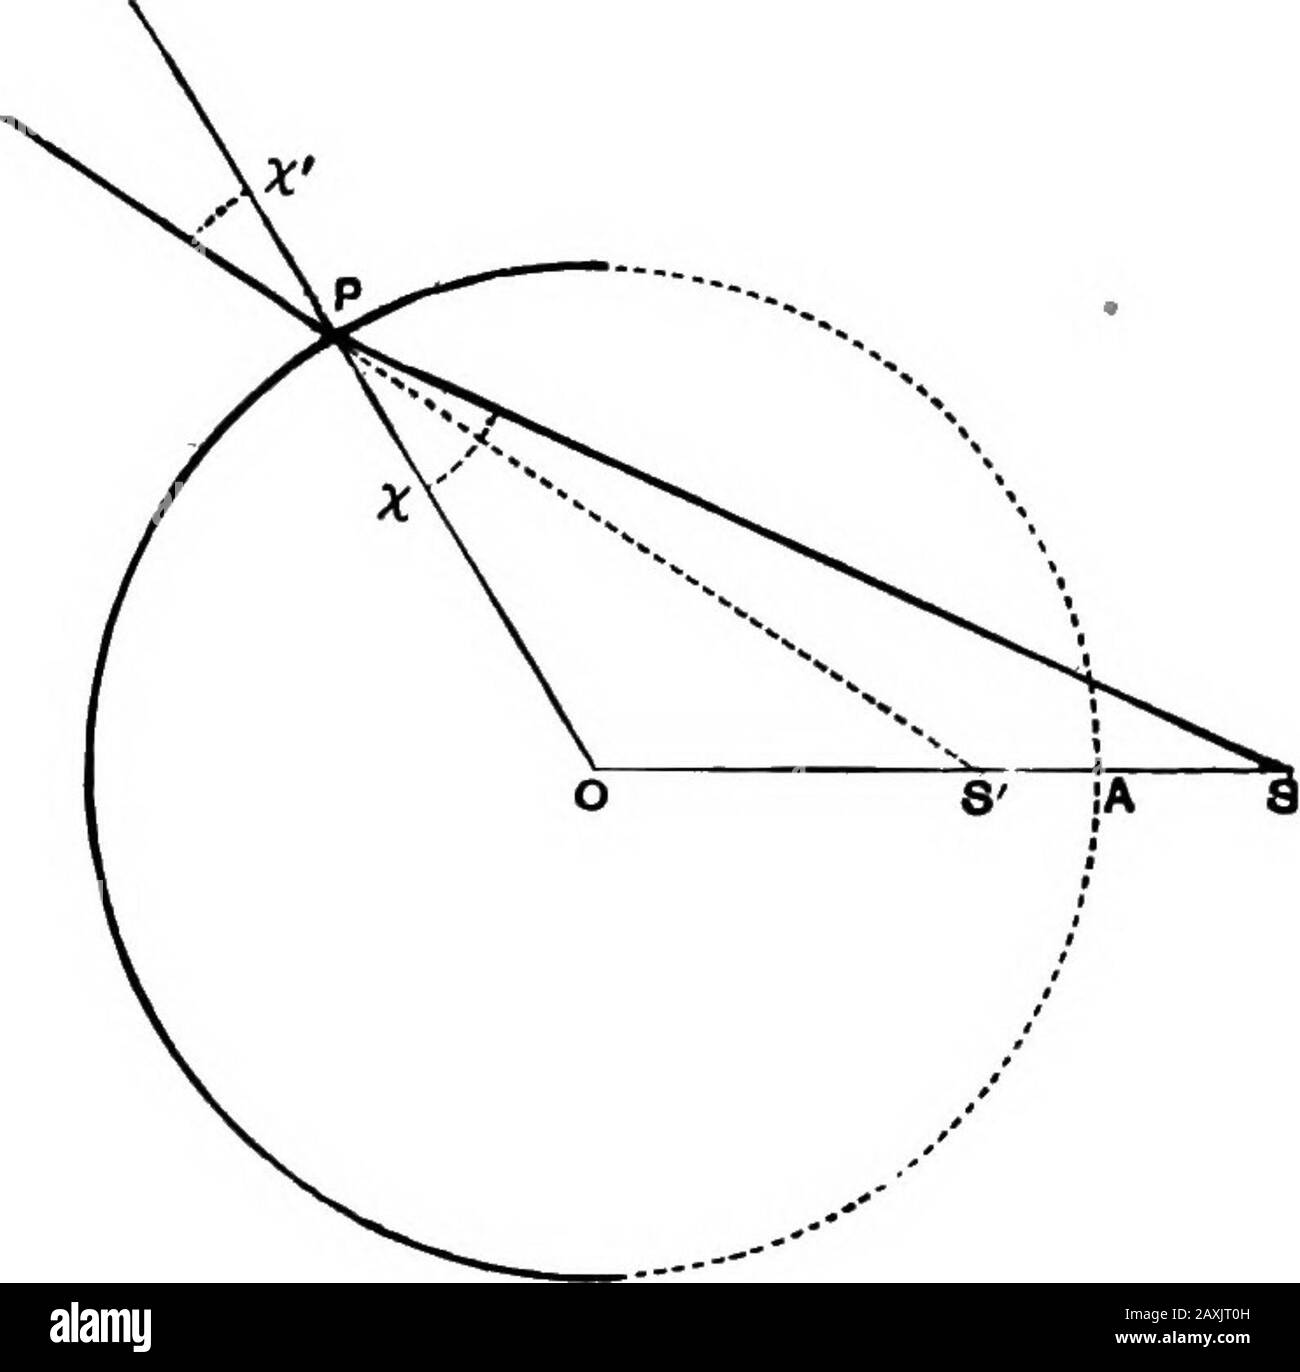 An elementary course of infinitesimal calculus . = 2a (6), we find cos^ = cos^ (7), or, the focal distances make equal angles with the curve onopposite sides. Ex. 2. To find the form which a reflecting or refractingsurface must have in order that incident rays whose directionspass through a fixed point S may be reflected or refracted indirections passing through a fixed point iS. The case of reflection is merely the converse of Ex. 1. Thesurface must have the form generated by the revolution of anellipse or hyperbola about the line joining the foci (S, S). 25—2 388 INFINITESIMAL CALCULUS. [OH. Stock Photo